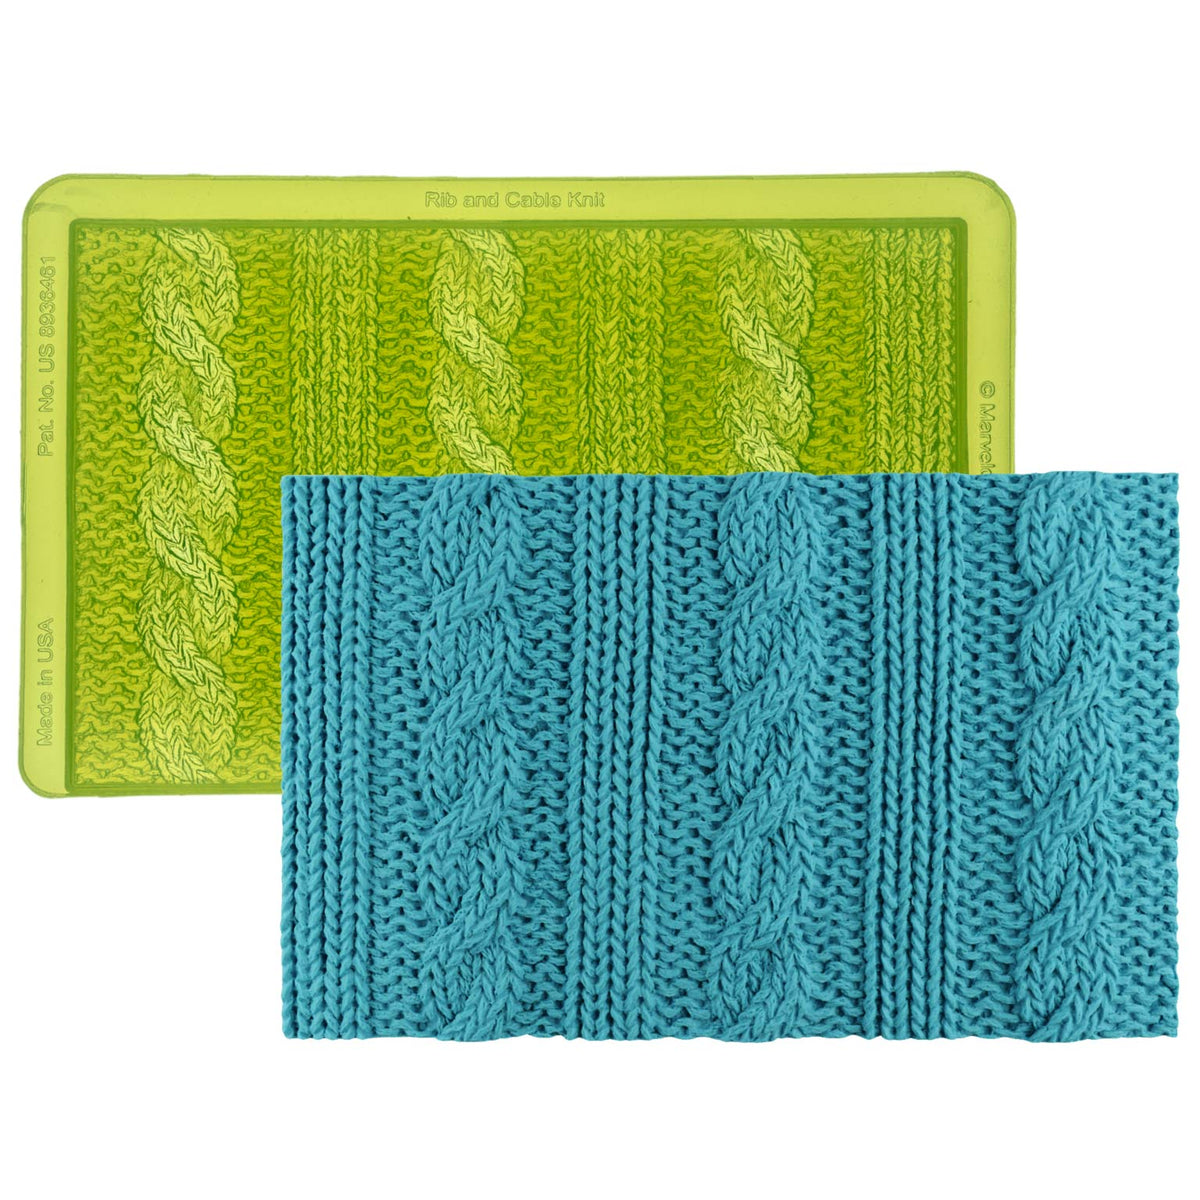 Marvelous Molds  Cable Knit Border – Shore Cake Supply